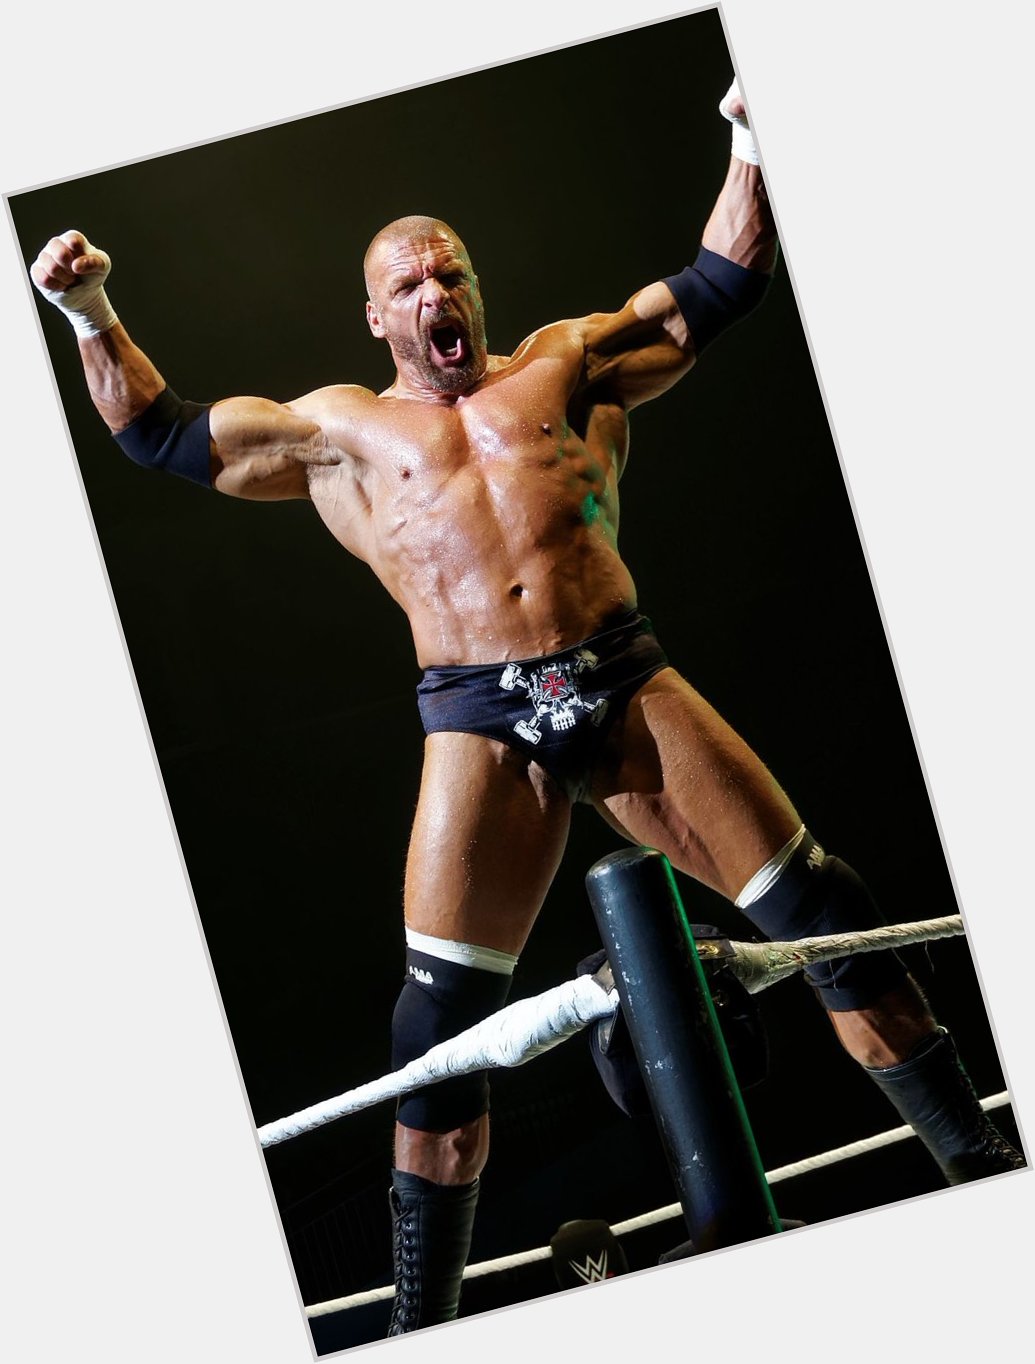 Happy birthday to WWE Grand Slam Champion and NXT founder, Triple H, born on this date, July 27, 1969. 